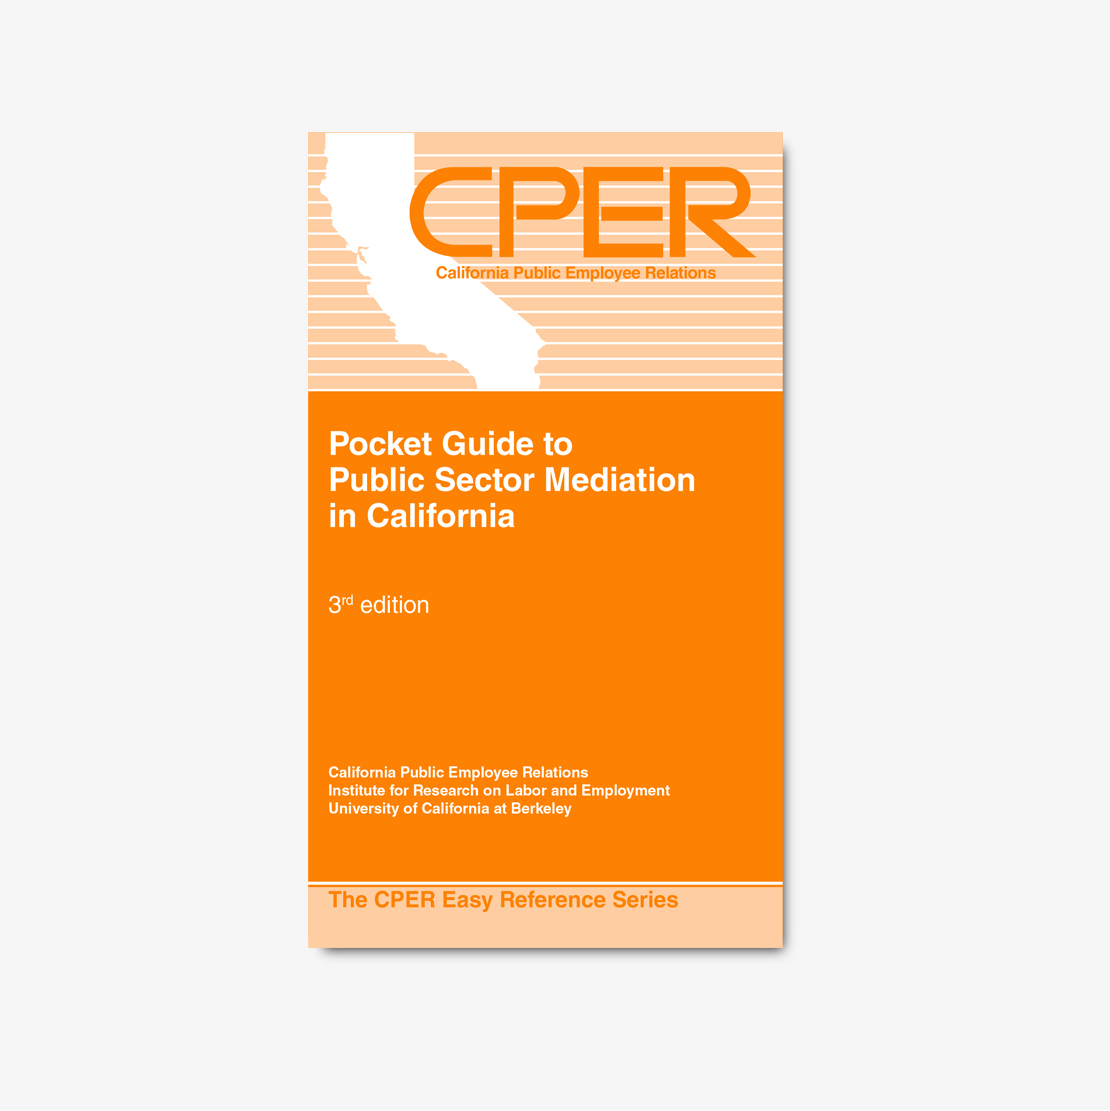 Pocket Guide to Public Sector Mediation in California